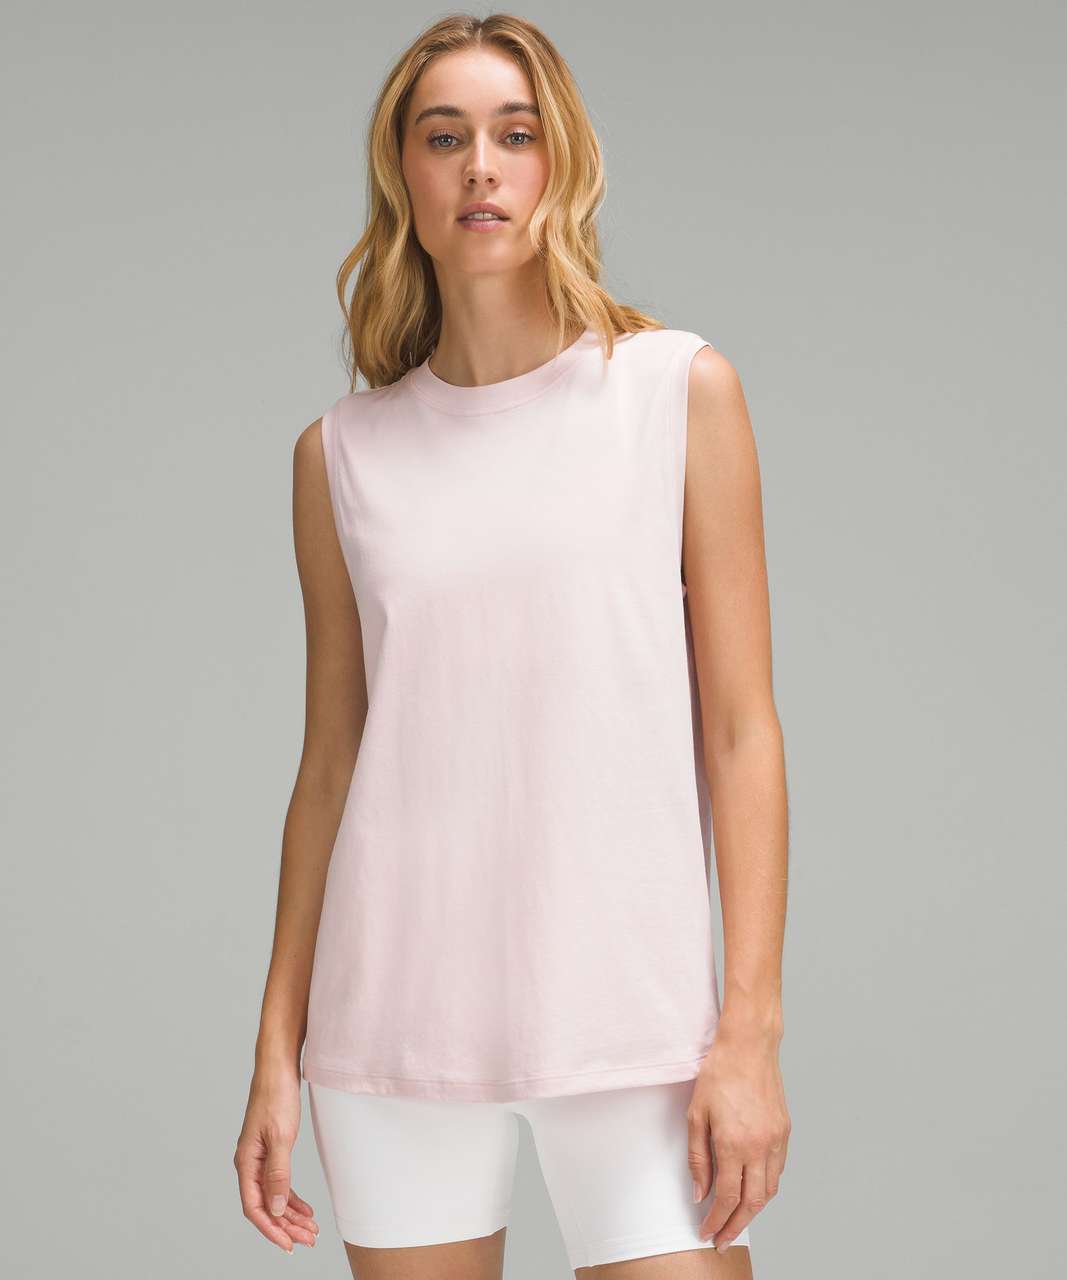 Lululemon All Yours Tank Top - Flush Pink